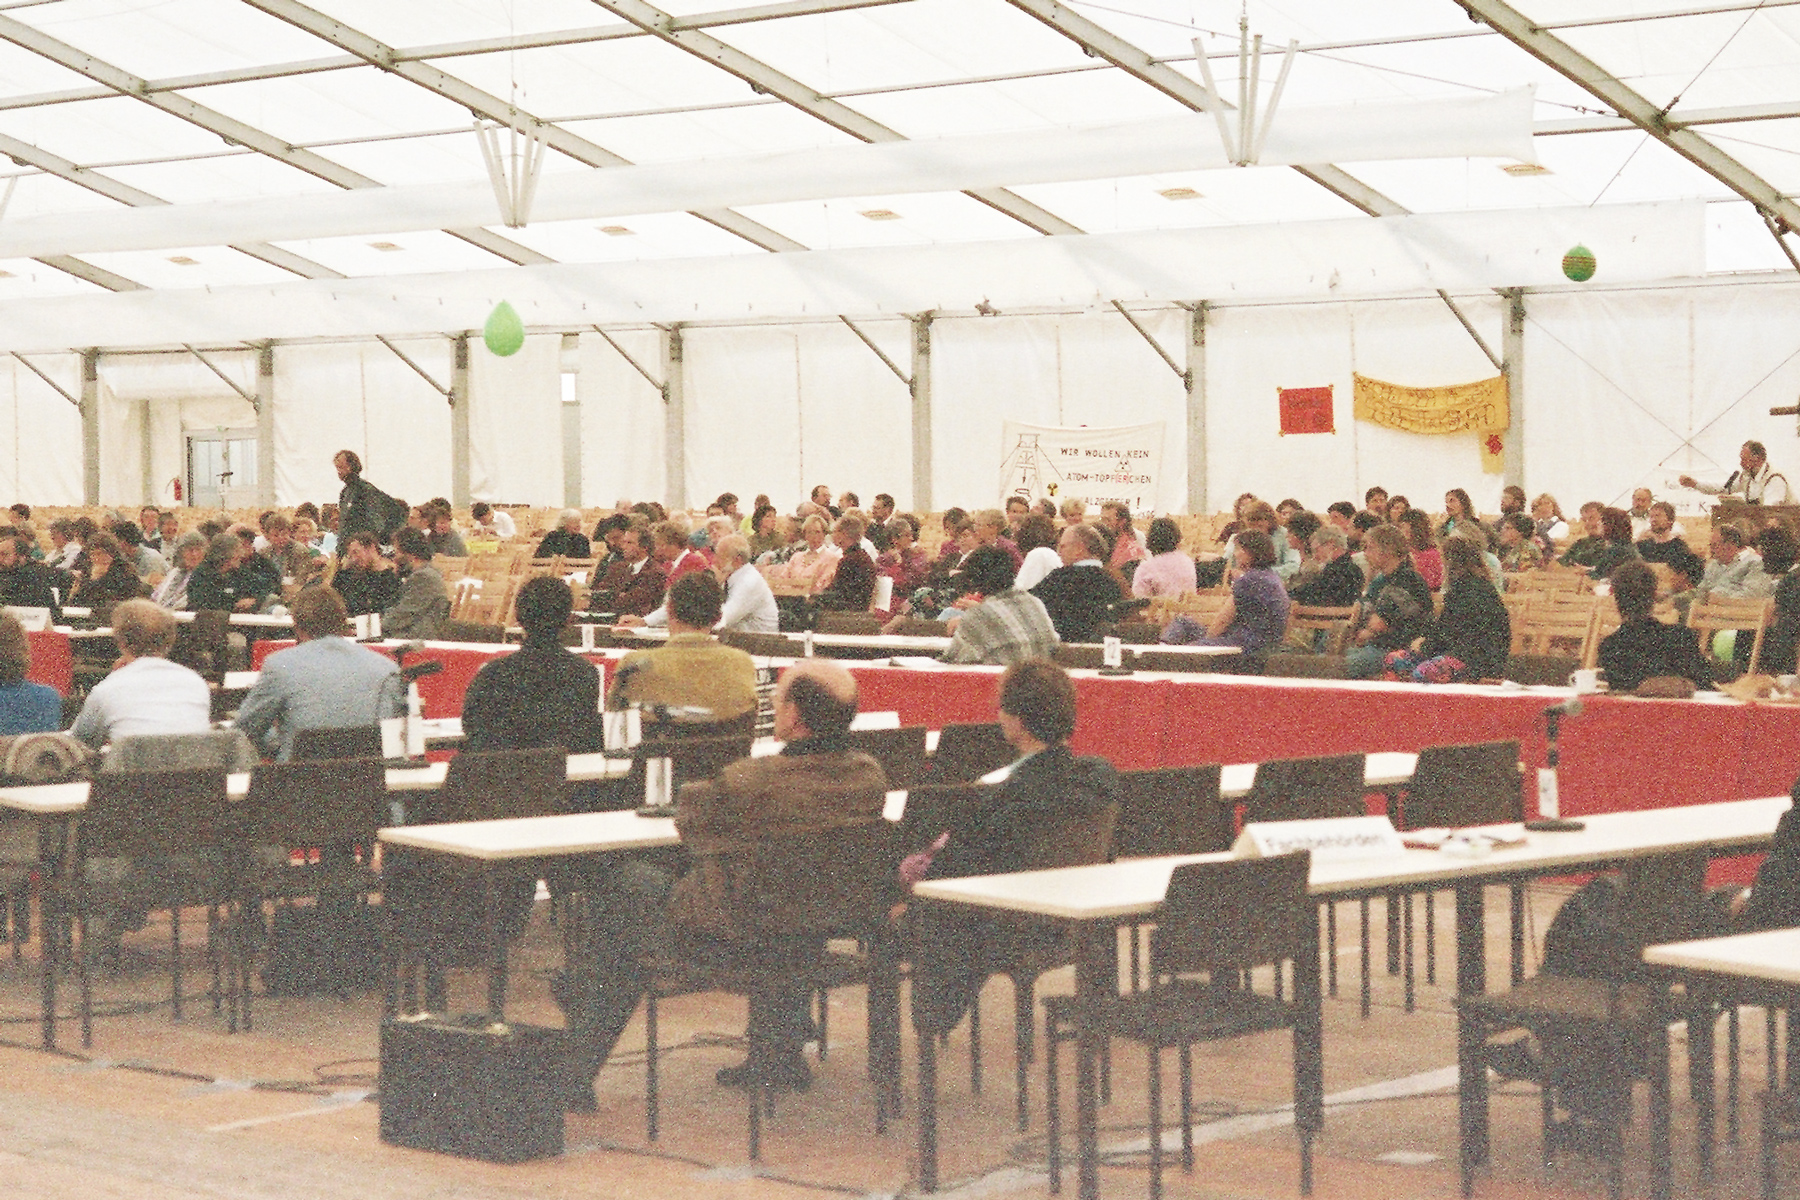 A large tent in which people sit at tables.